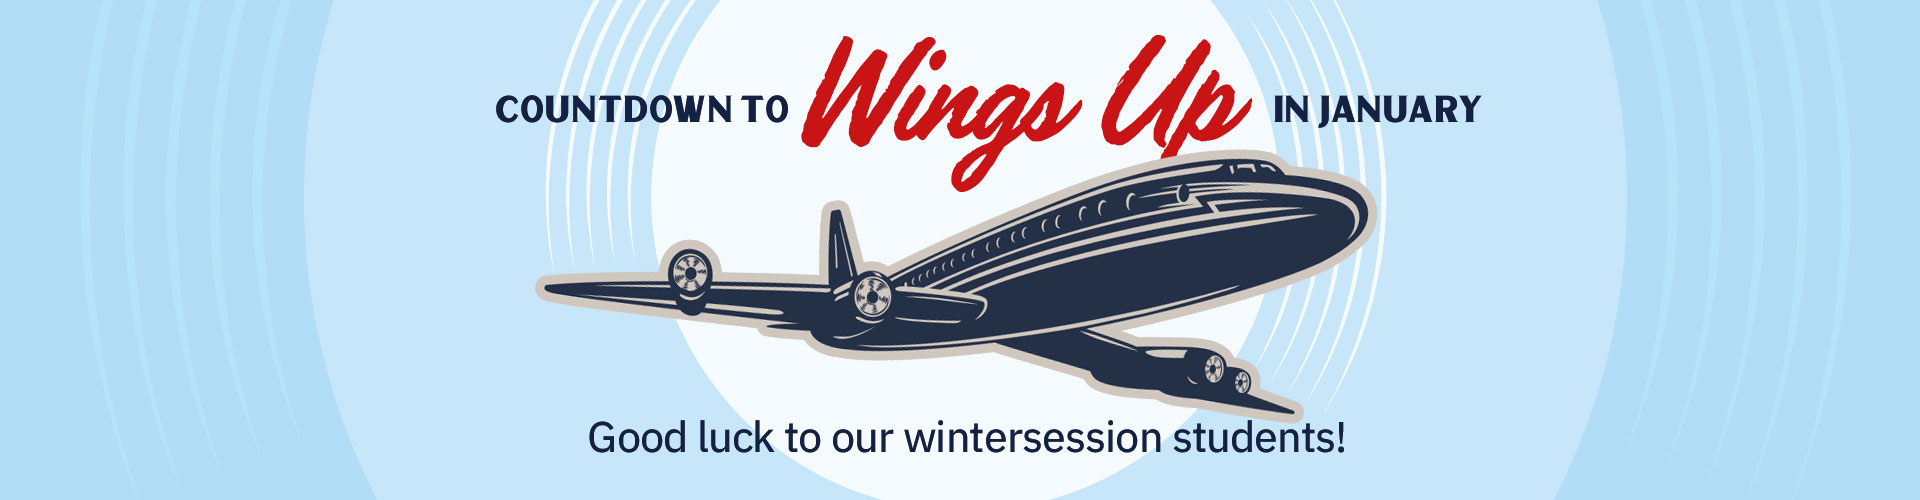 Countdown to Wings Up in January. Good luck to our wintersession students!